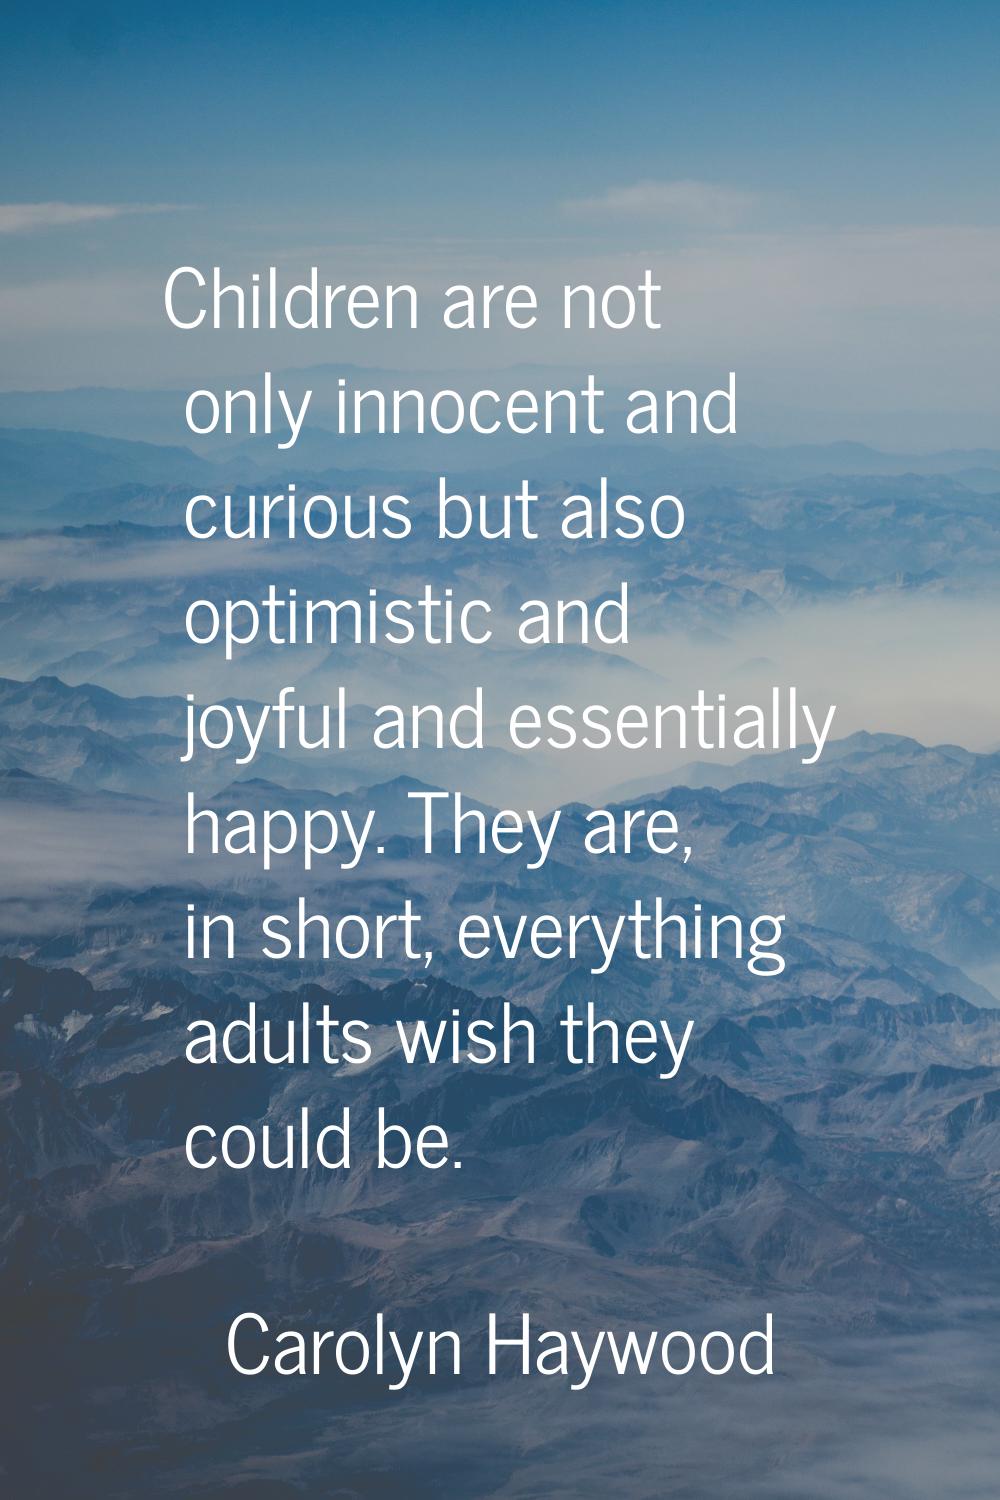 Children are not only innocent and curious but also optimistic and joyful and essentially happy. Th